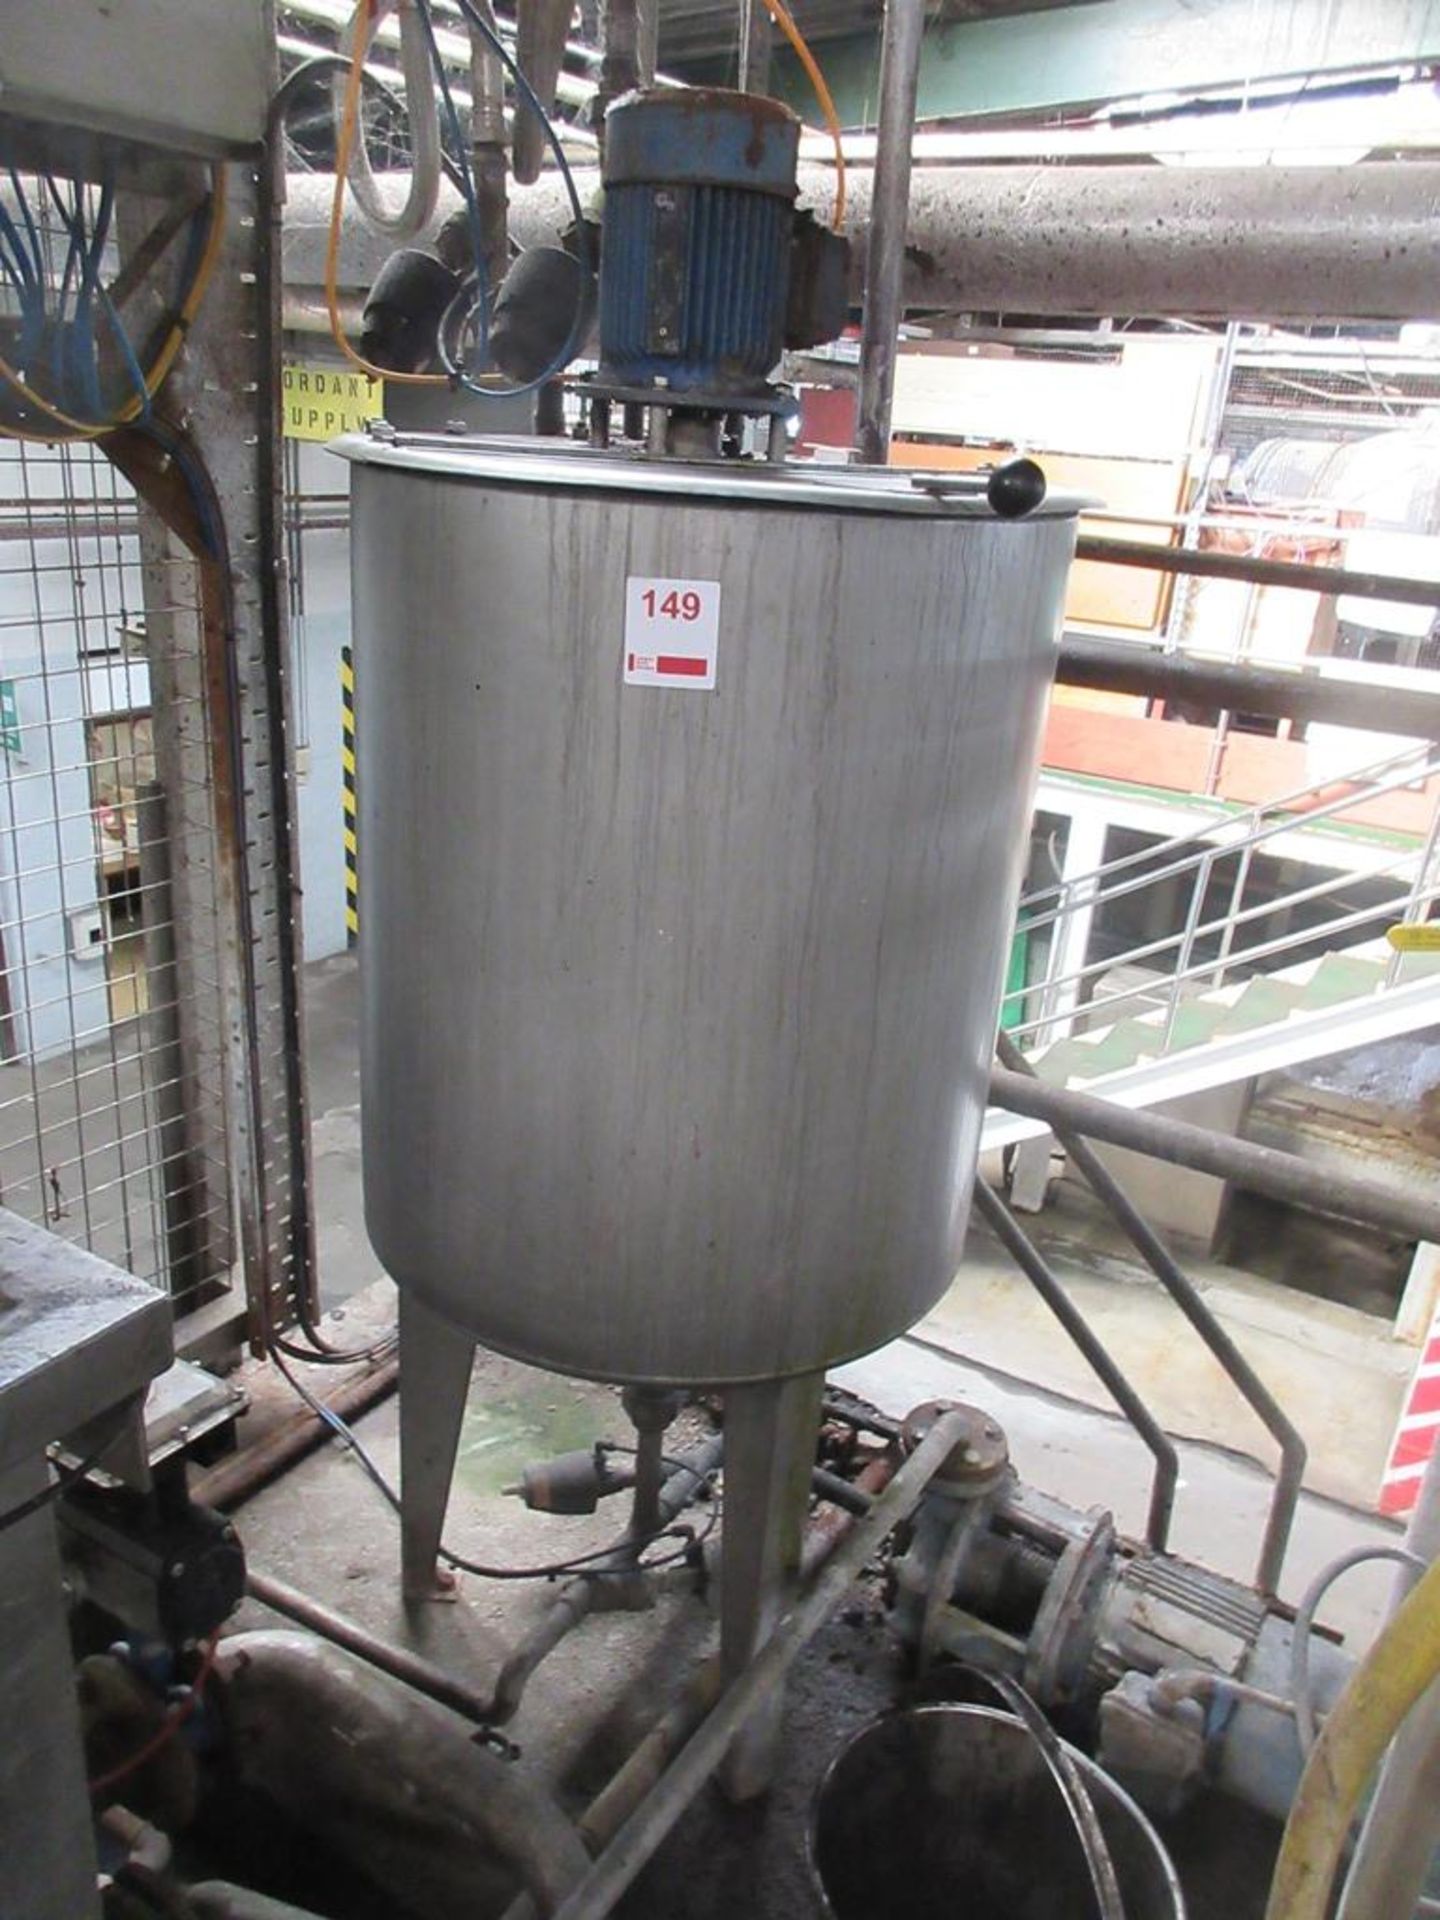 Stainless steel mixing tank, approx. size 650mm diameter x 750mm